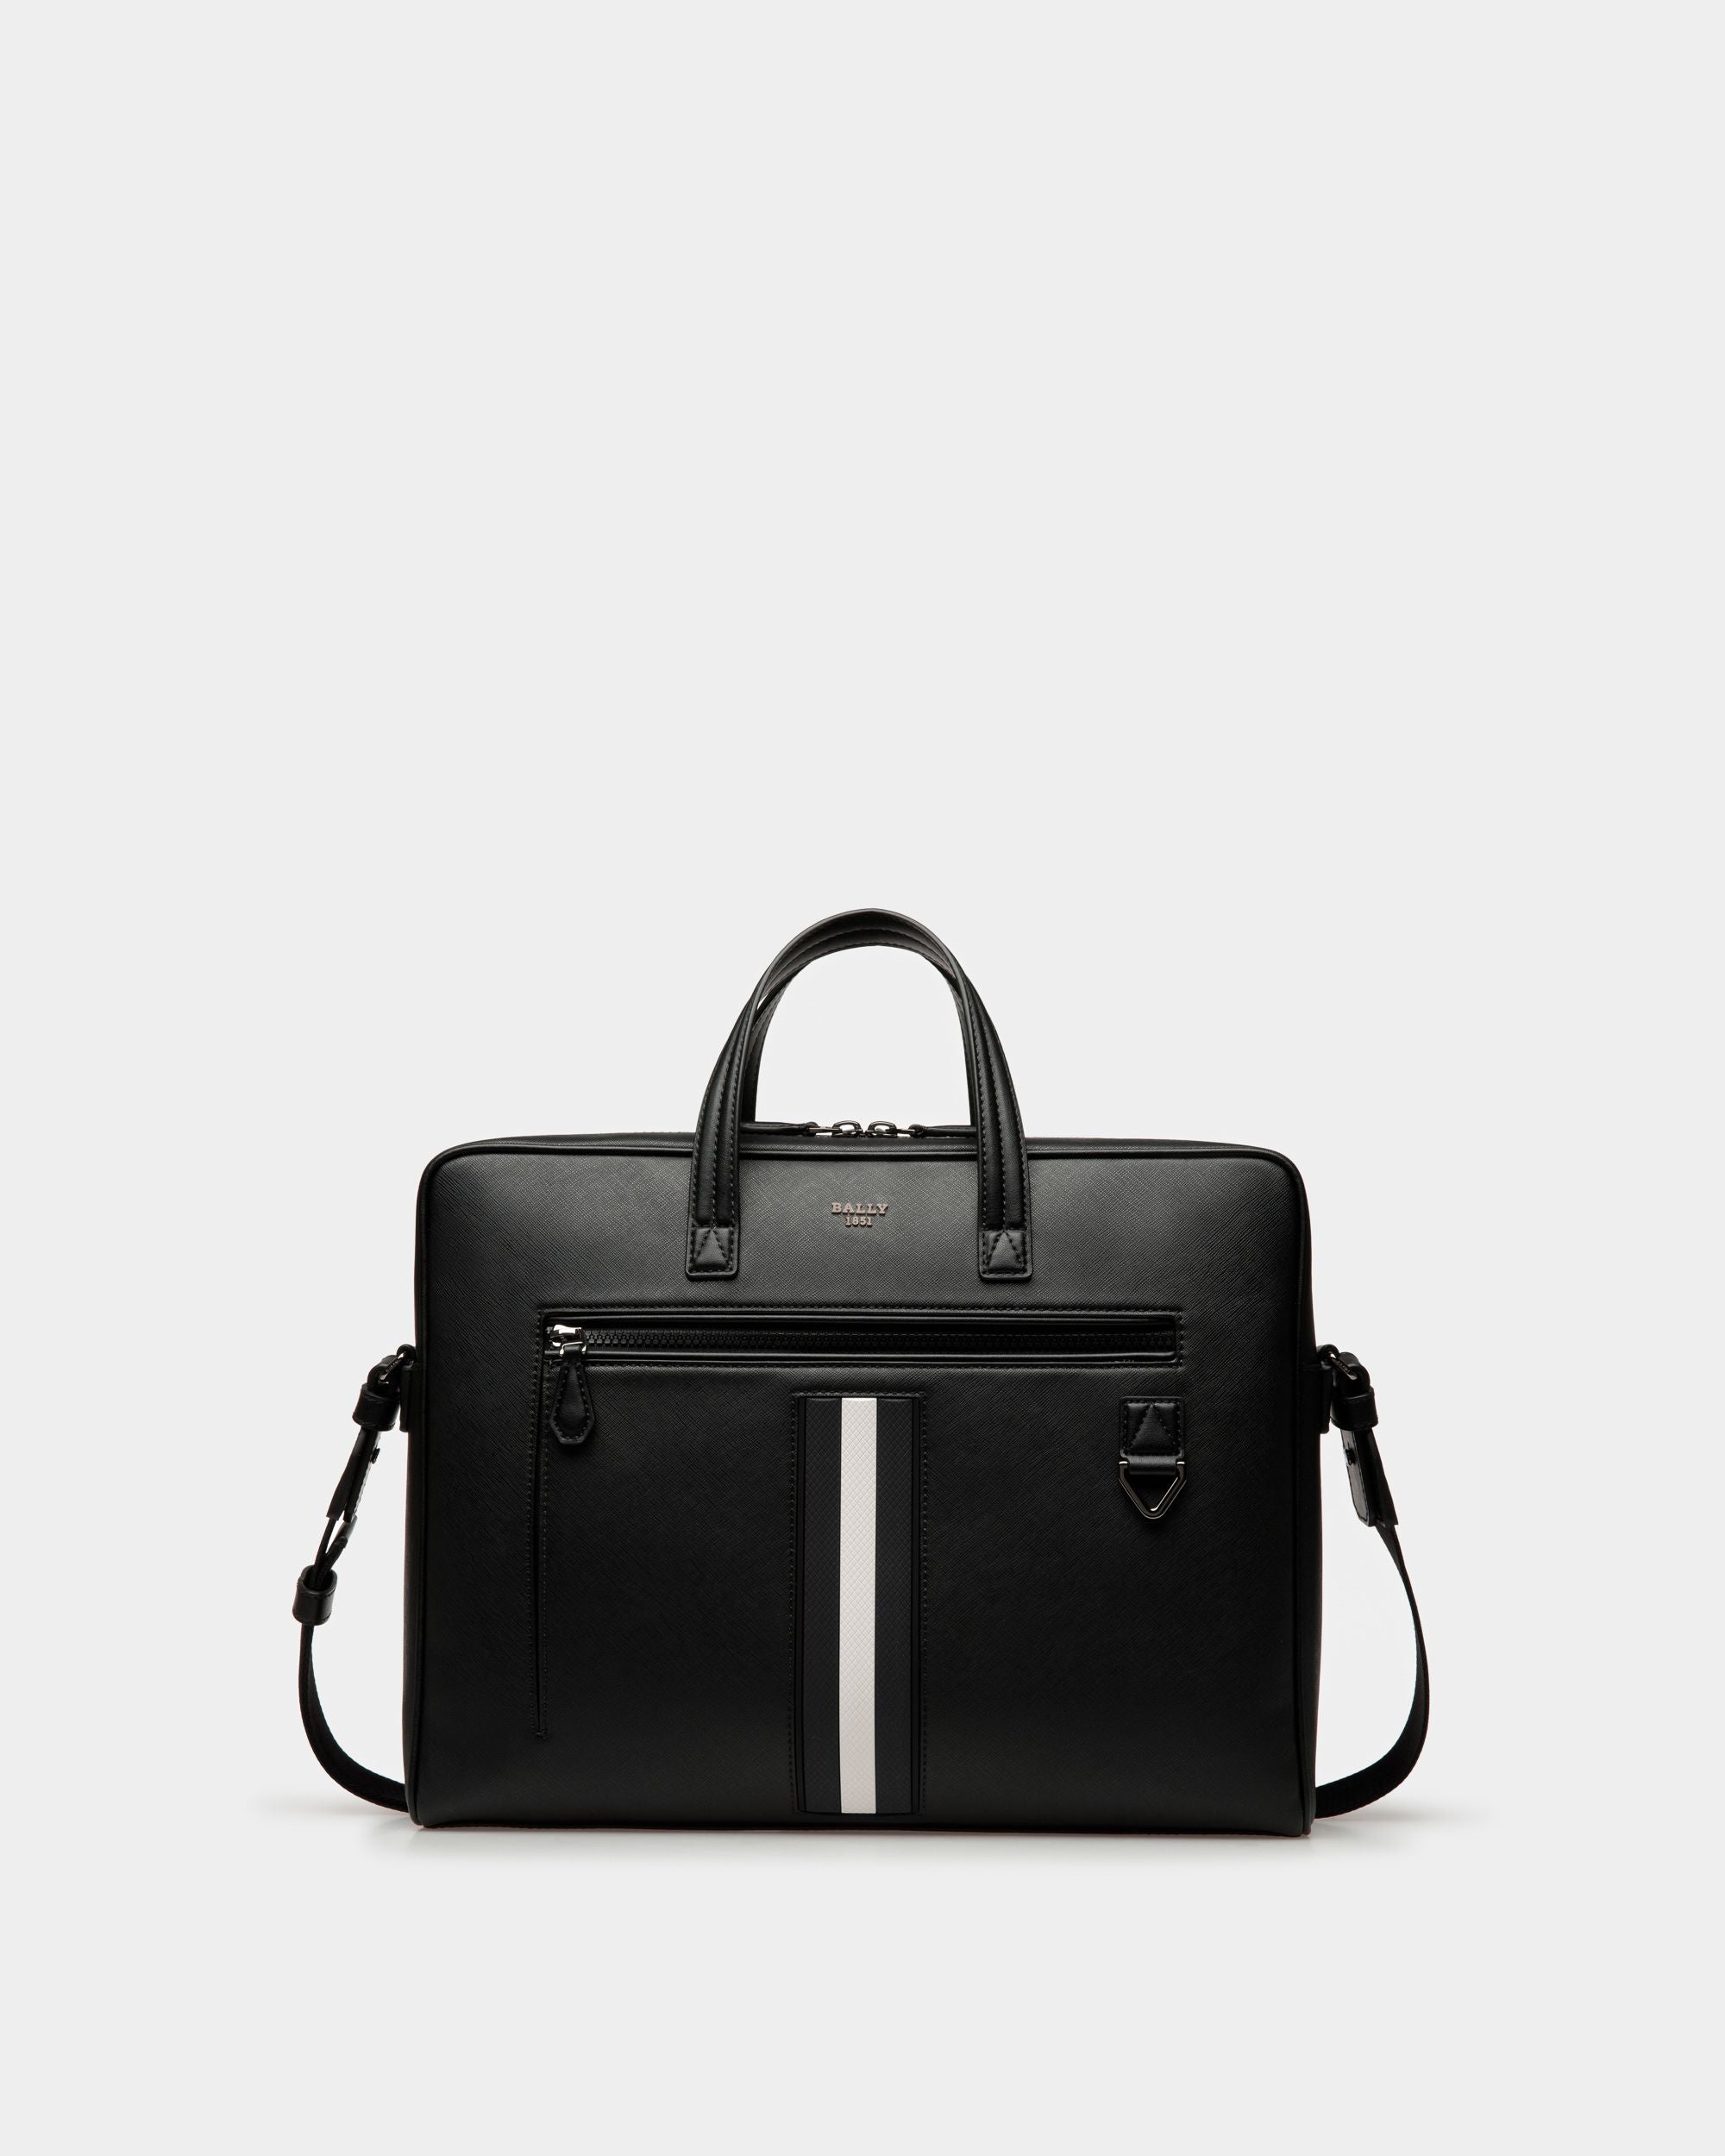 Business Bags for Men: Leather Designer Briefcases | Bally